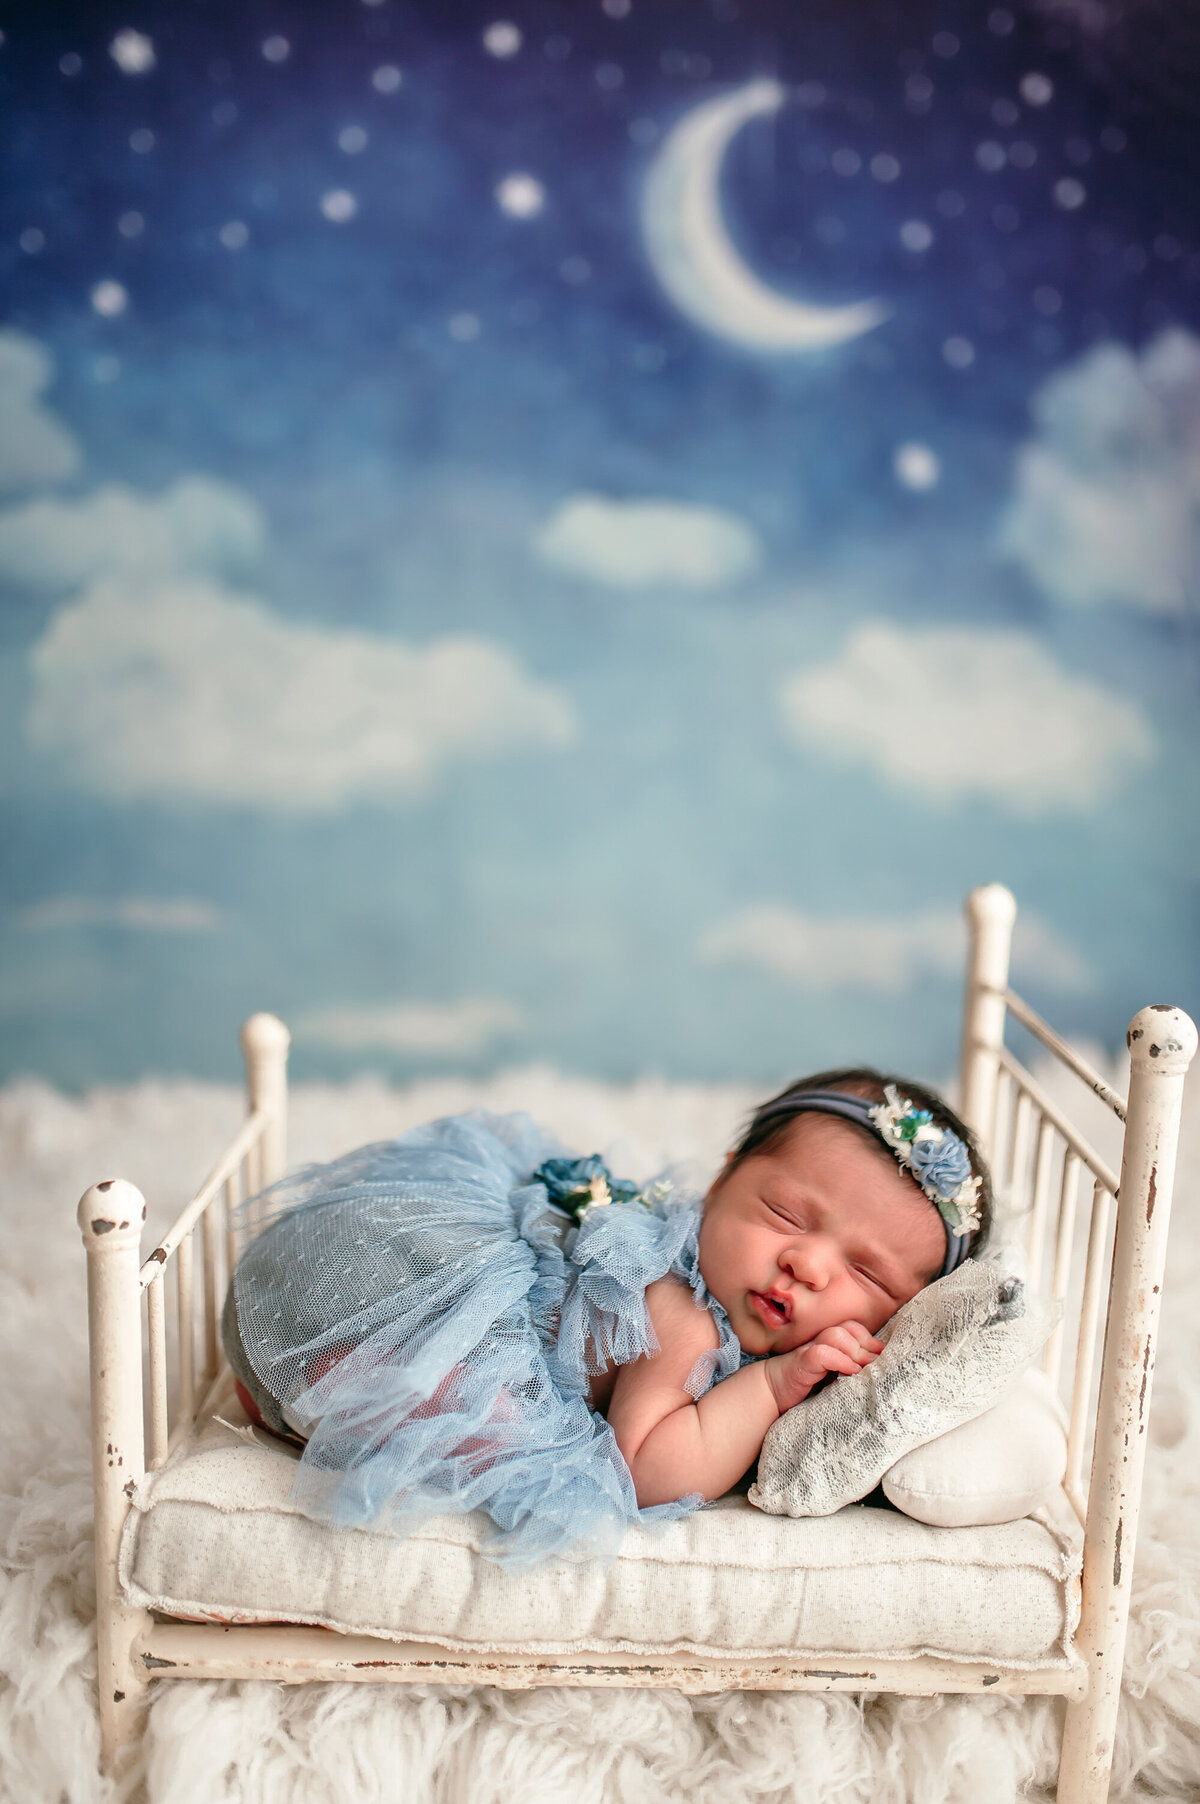 Night time themed newborn portrait of a baby girl in a blue dress asleep on a tiny doll bed in front of a moon and star backdrop.